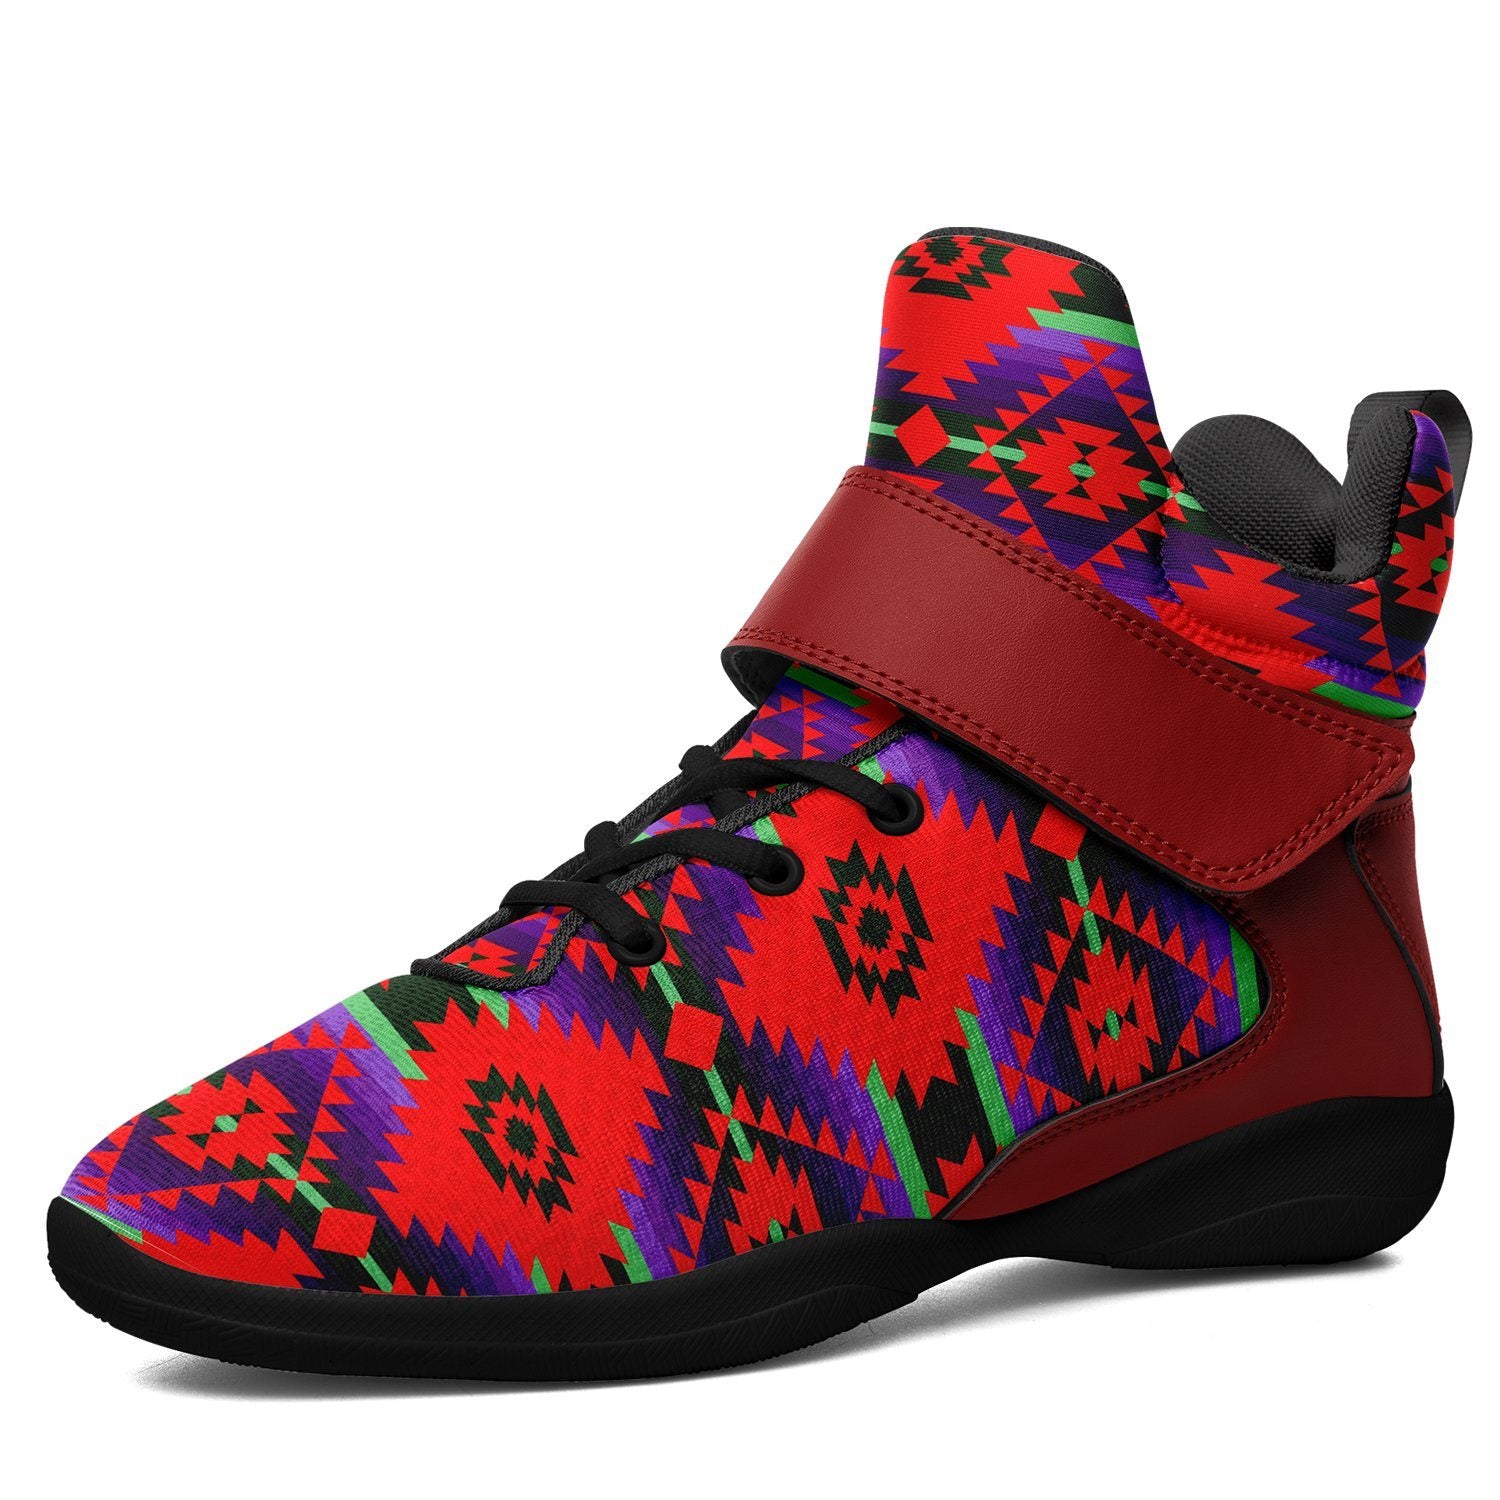 Cree Confederacy Chicken Dance Ipottaa Basketball / Sport High Top Shoes 49 Dzine US Women 4.5 / US Youth 3.5 / EUR 35 Black Sole with Red Strap 